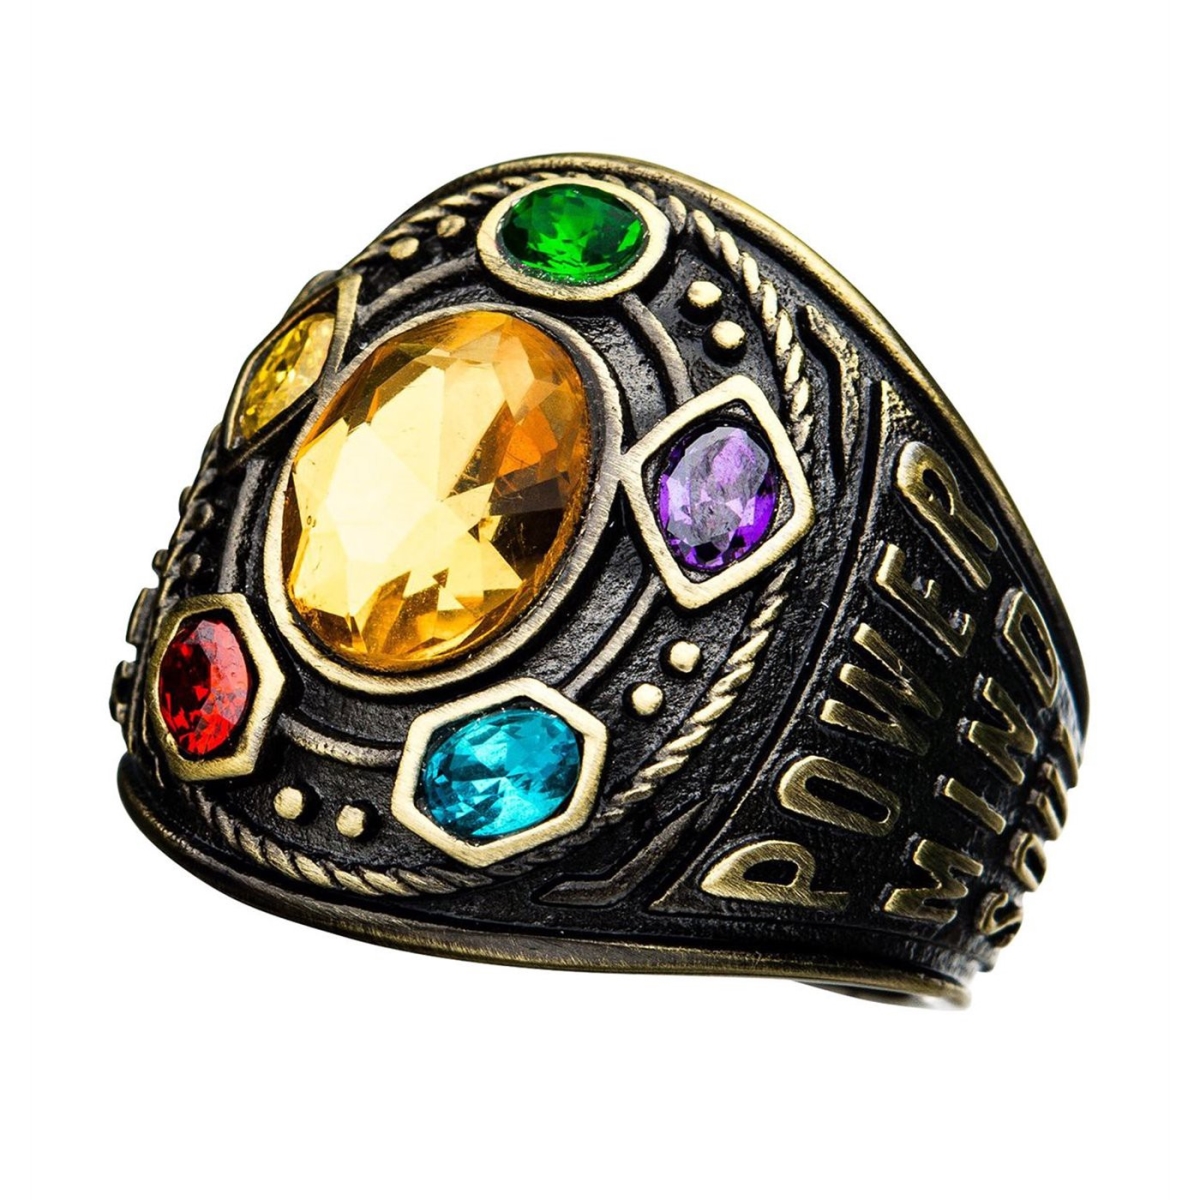 Picture of Avengers Endgame ringthanosgcoipr-9-Size 9 Avengers Endgame Infinity Gauntlet Class of Infinite Power Ring - Size 9